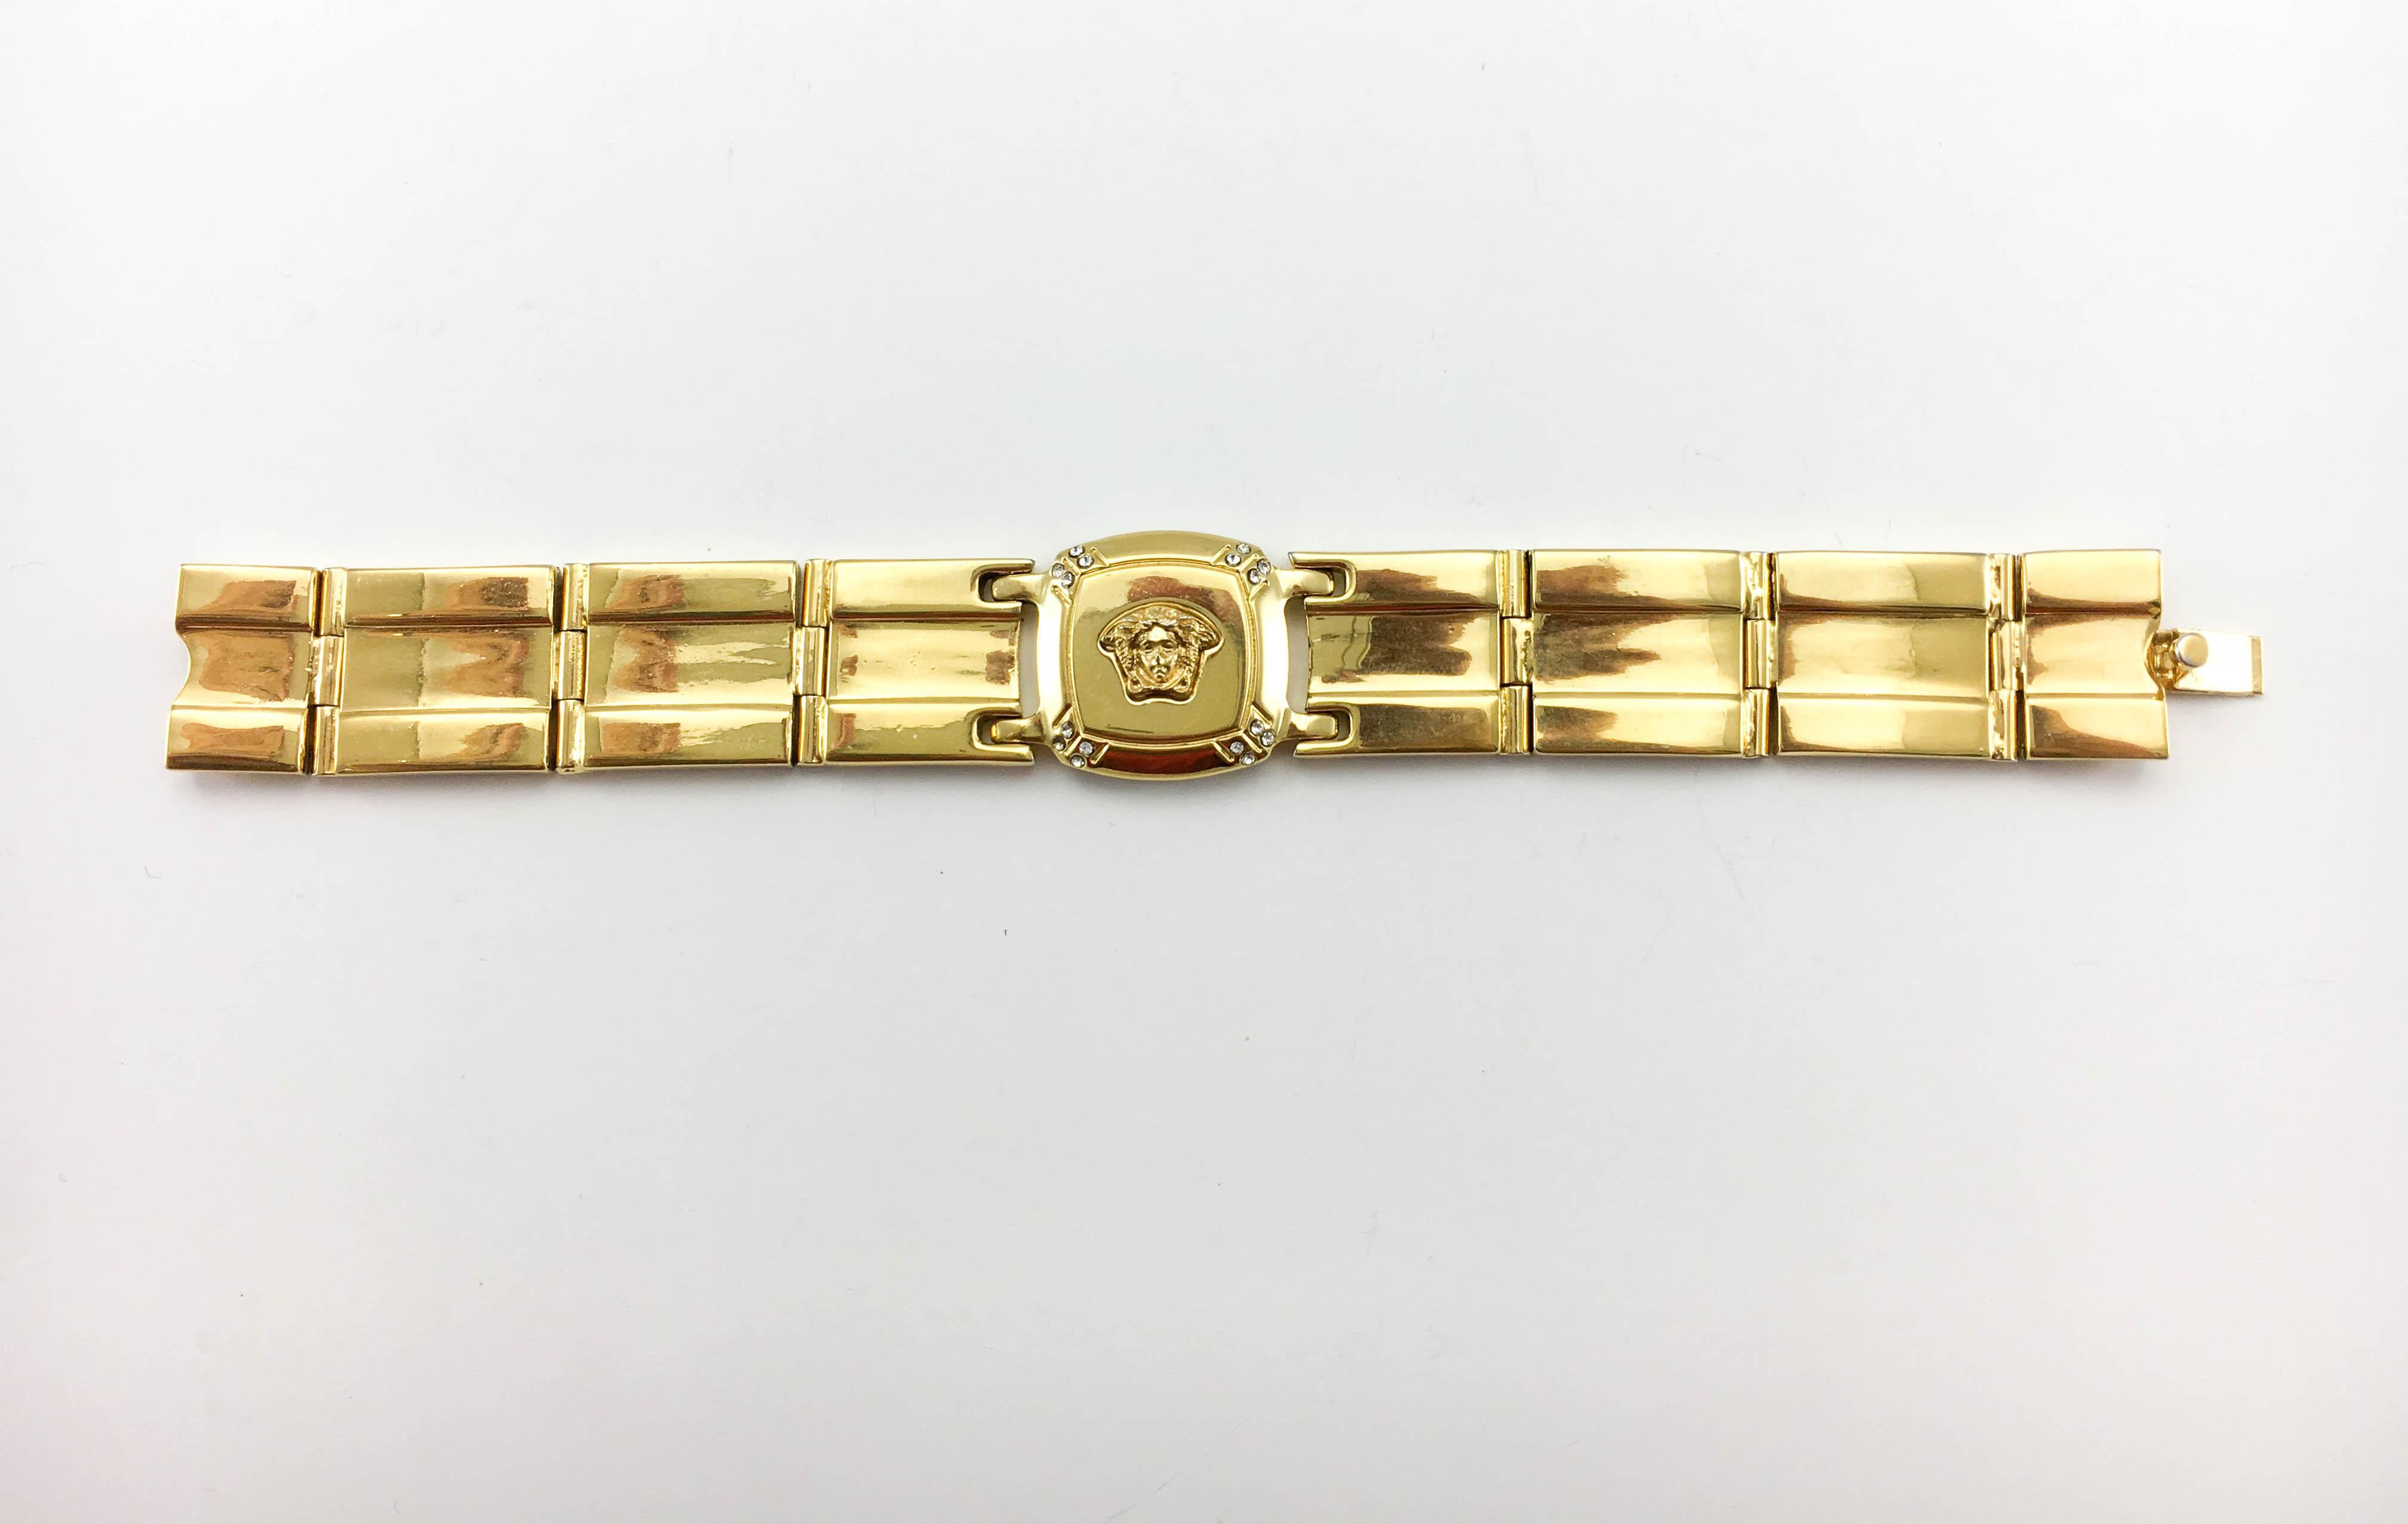 Vintage Gianni Versace Gold-Plated Medusa Head Bracelet. This gorgeous piece by Versace dates back from the 1990’s, when Gianni Versace himself was still alive. Crafted in gold-plated metal, it features a square link in the centre bearing the iconic